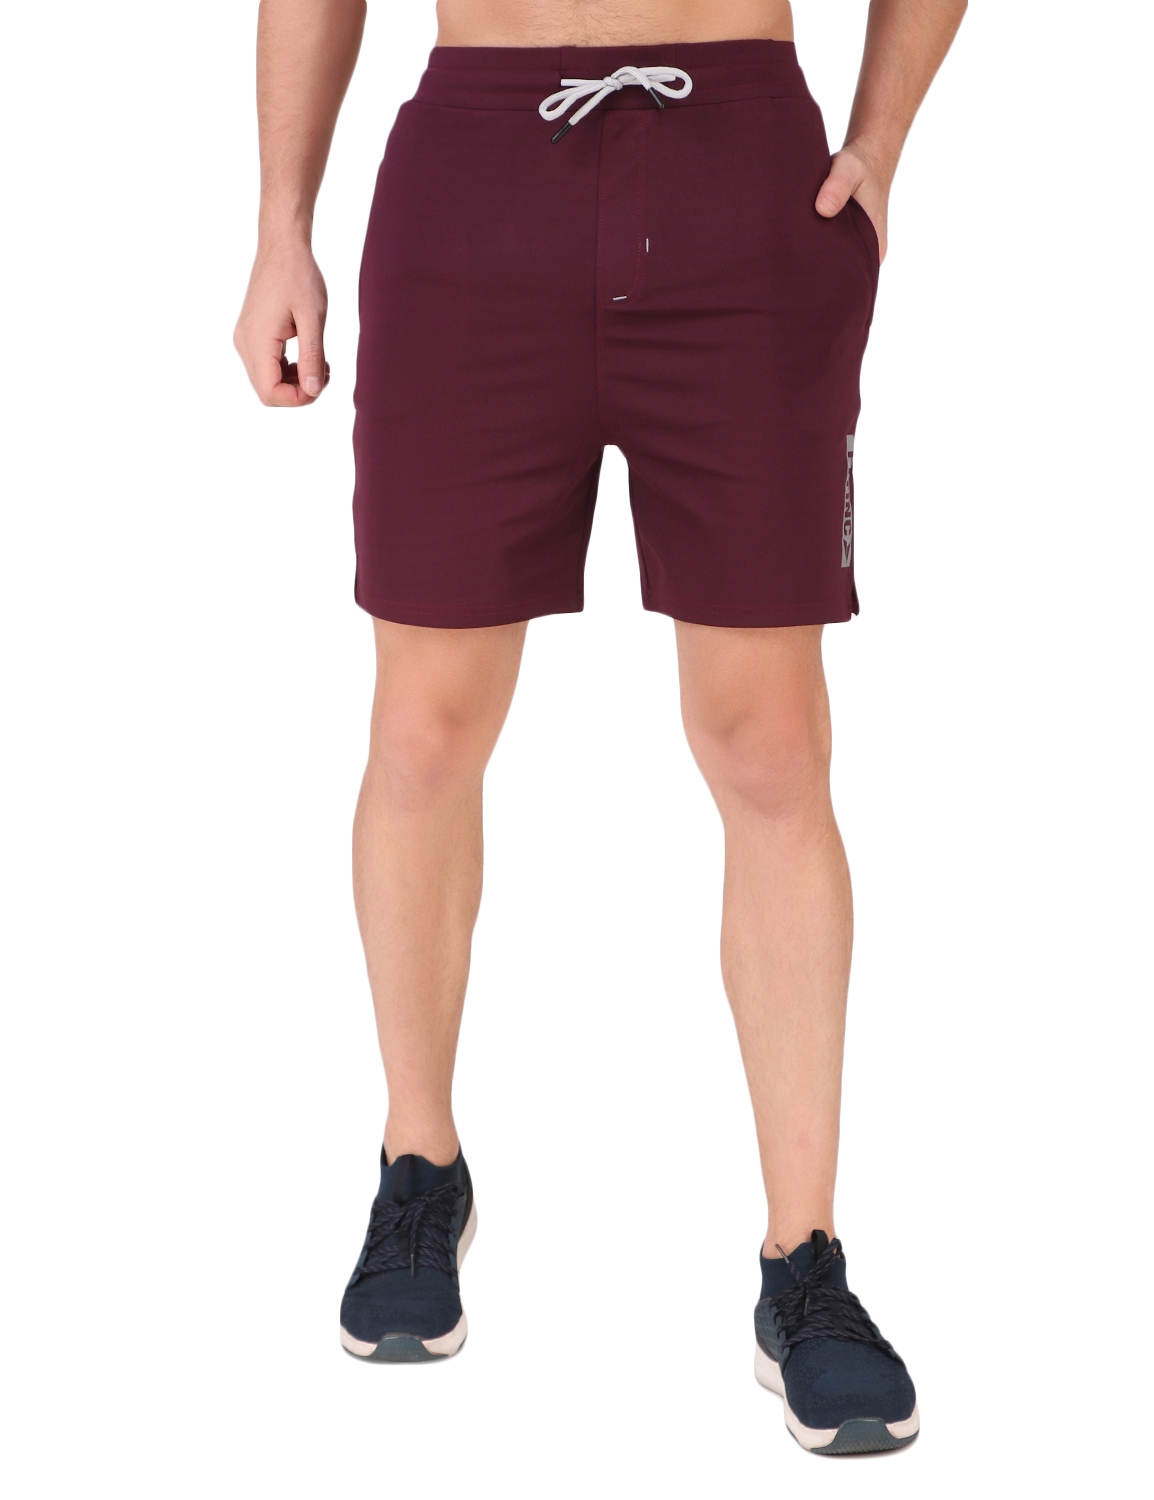 Fitinc | Fitinc Stretchable Men's Maroon Shorts for Gym, Running, Jogging, Yoga, Cycling, and Active Sports